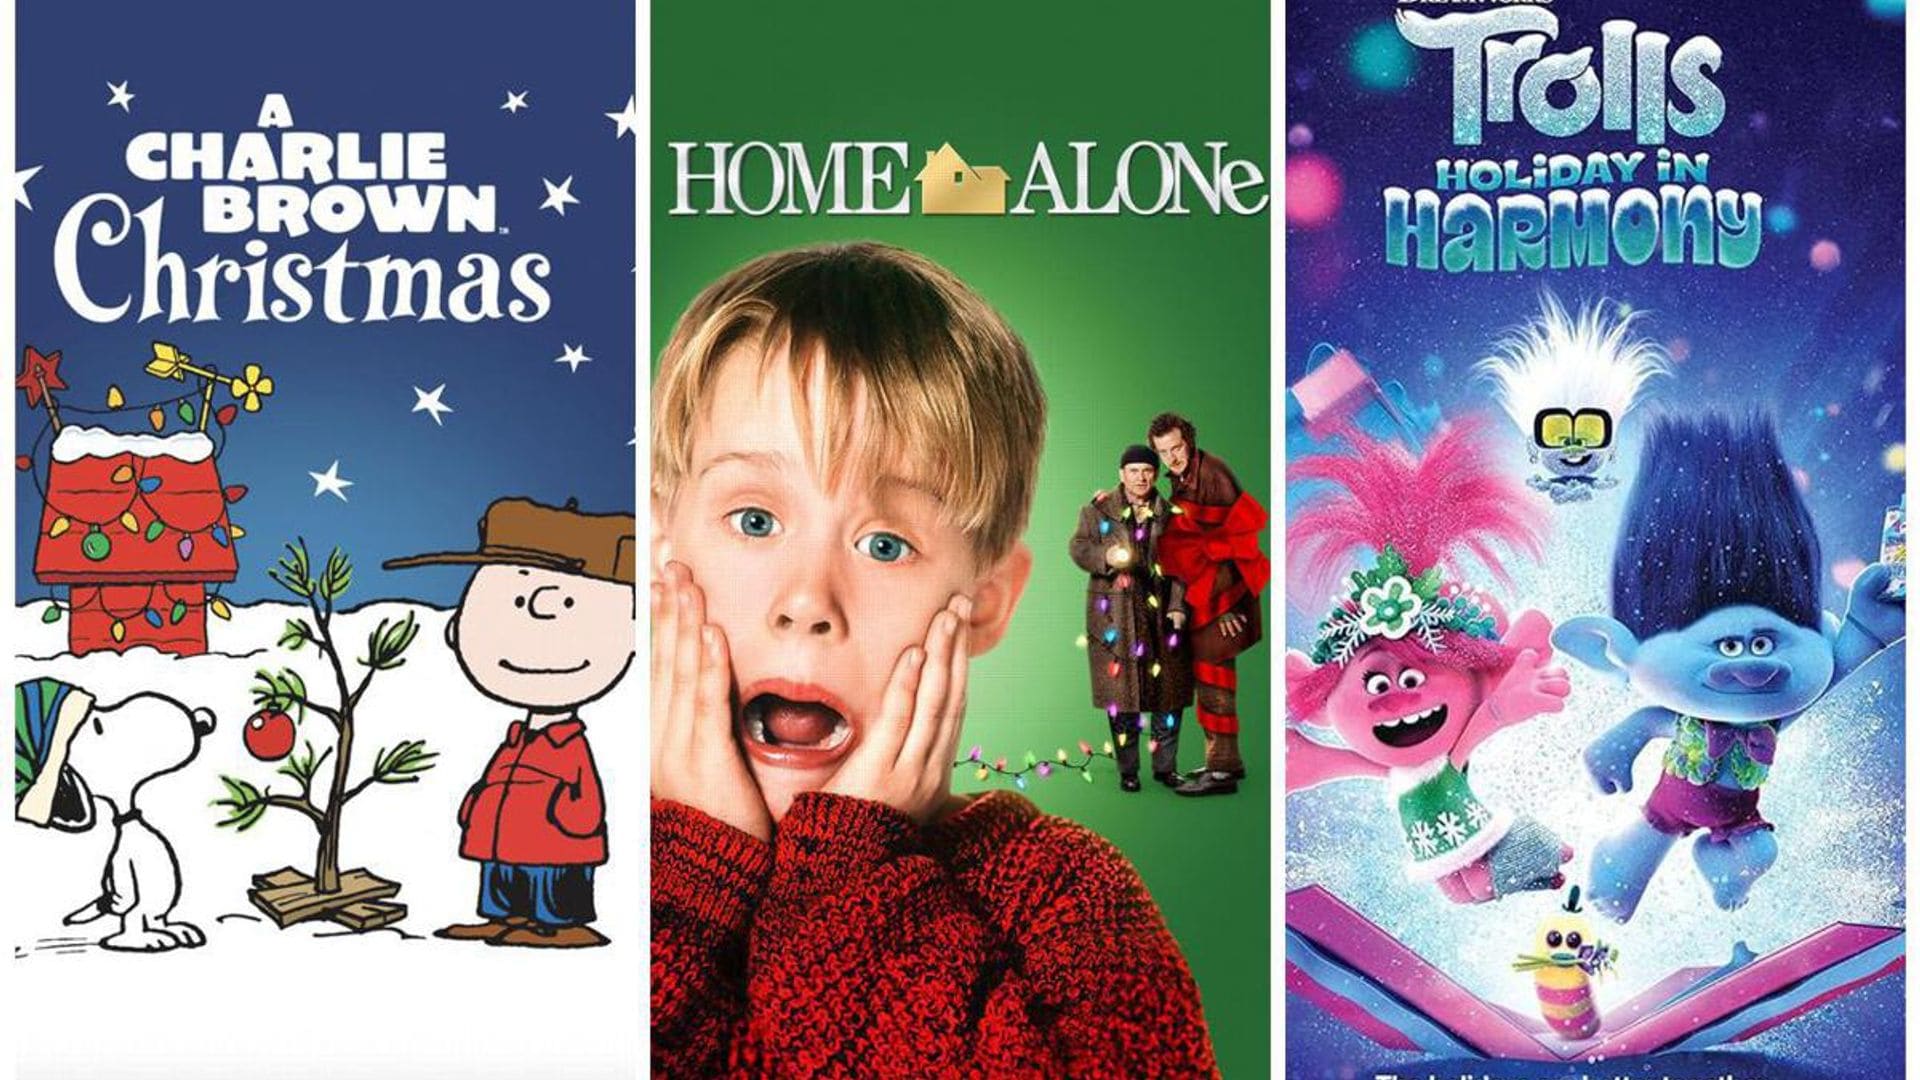 Best Christmas movies to watch this holiday on Netflix, Hulu, Disney+, Prime, Tubi and more